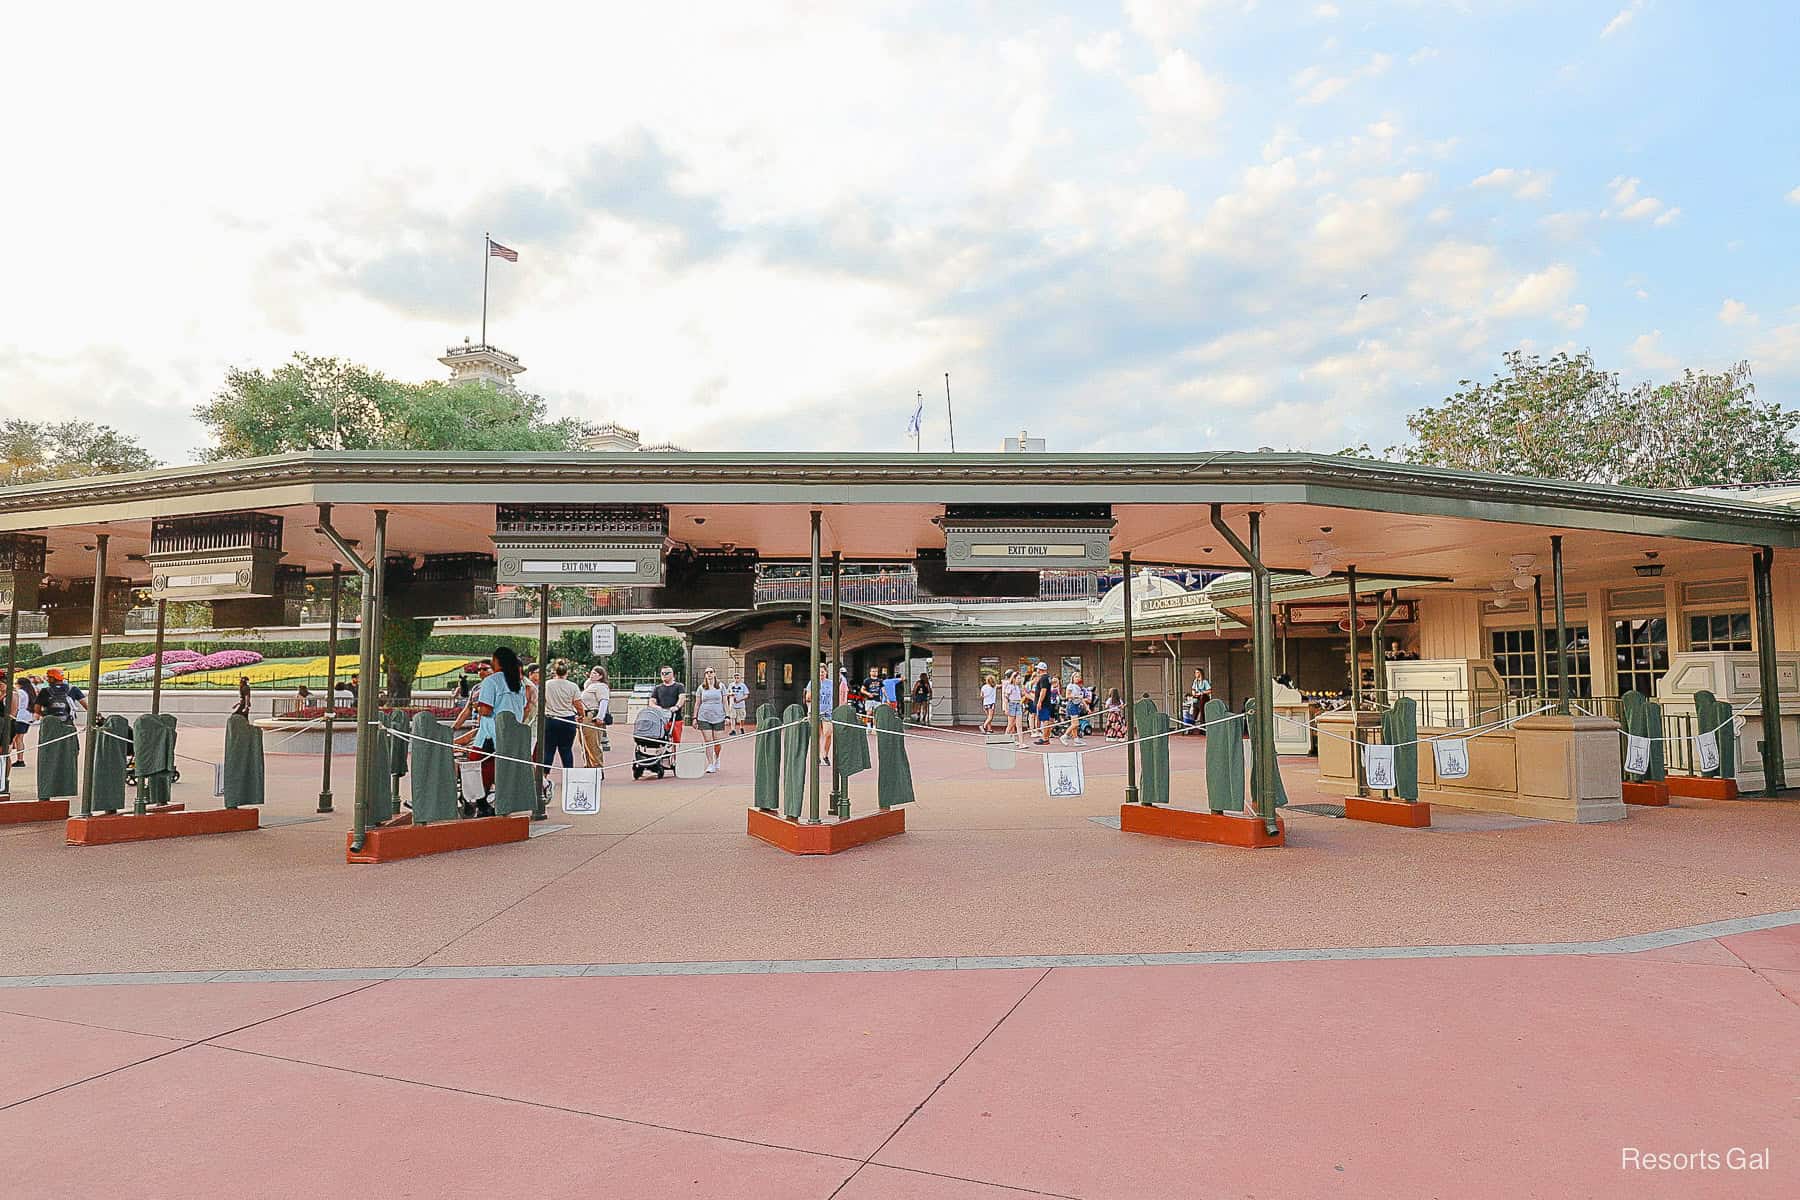 the ticket turnstiles is where you end up when you arrive at Magic Kingdom from the Contemporary walkway